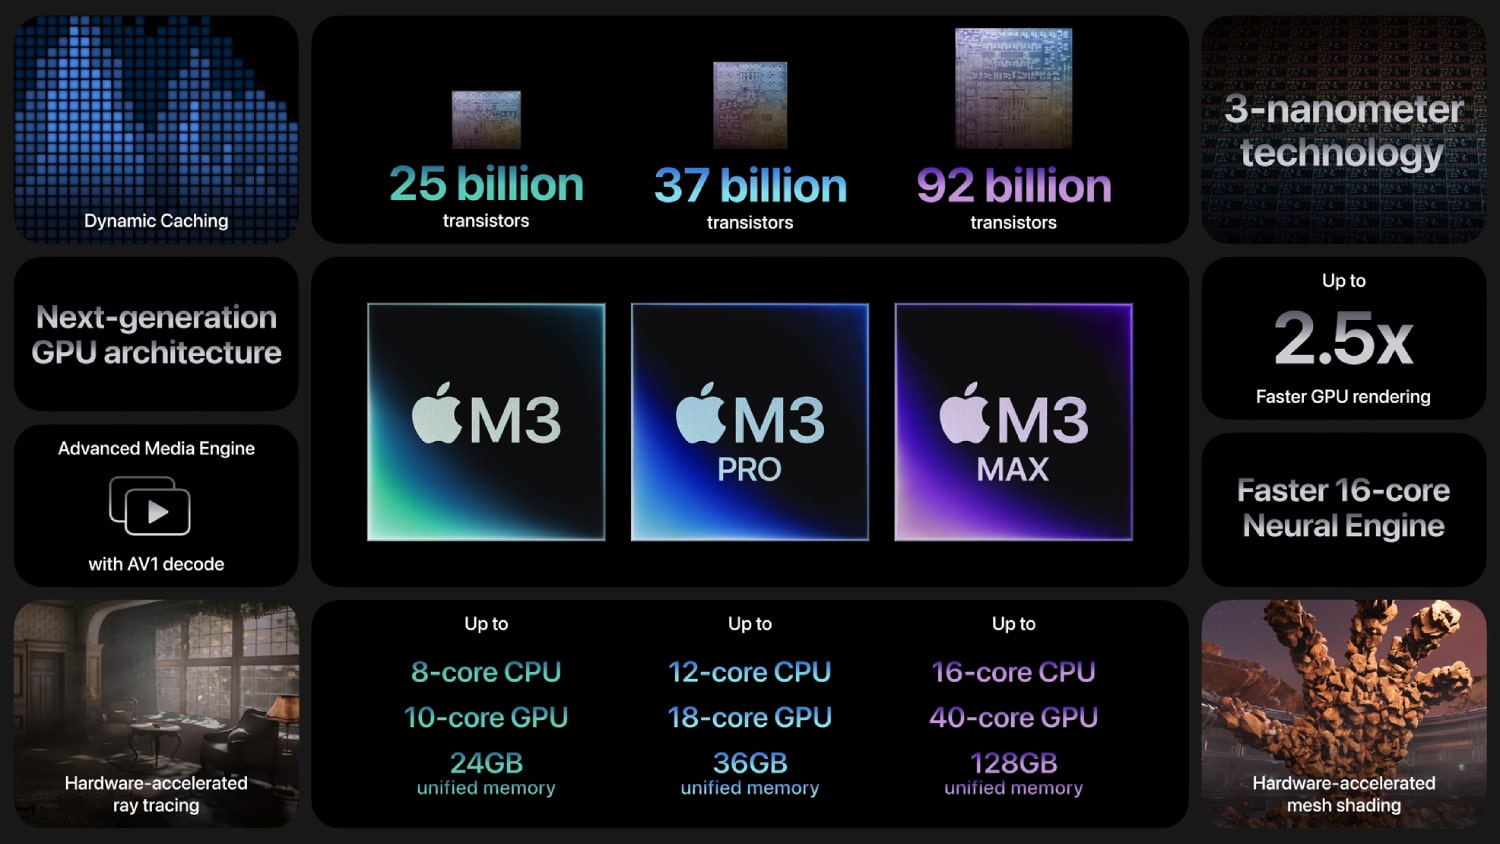 Statistics and features for Apple’s M3 series of chips, including the M3, M3 Pro, and M3 Max